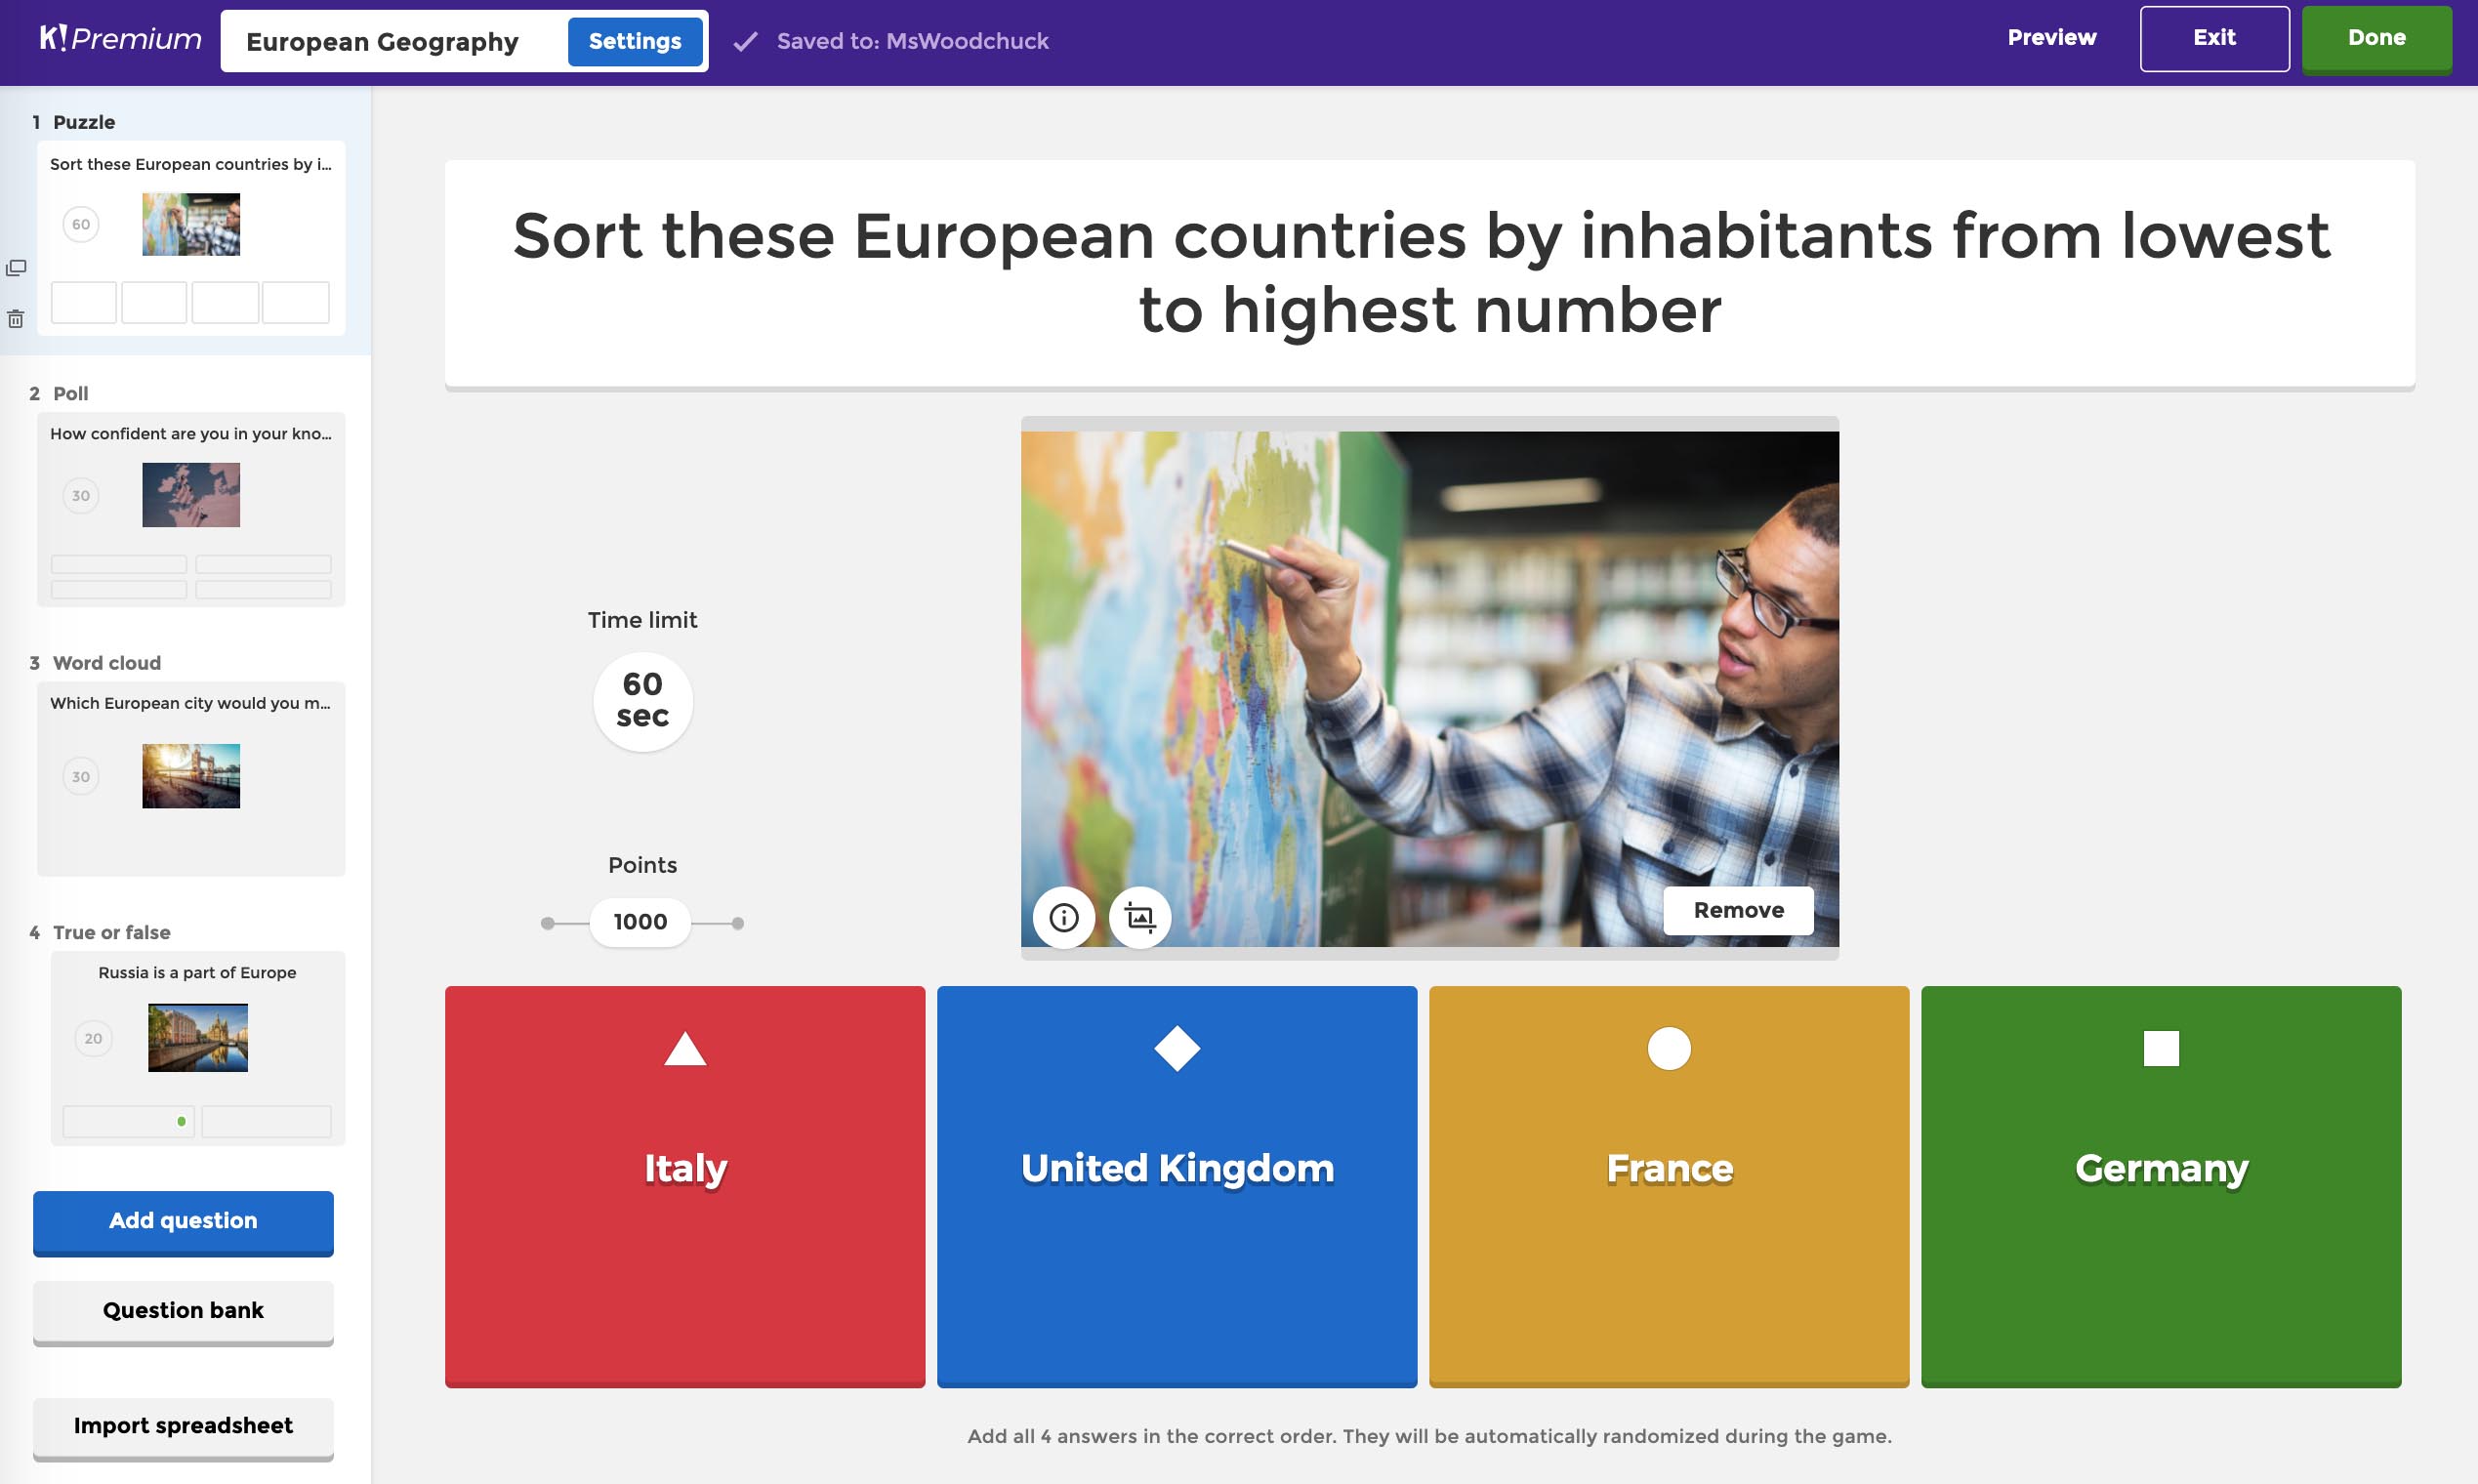 Kahoot quiz! The best interactive quiz game to play with students